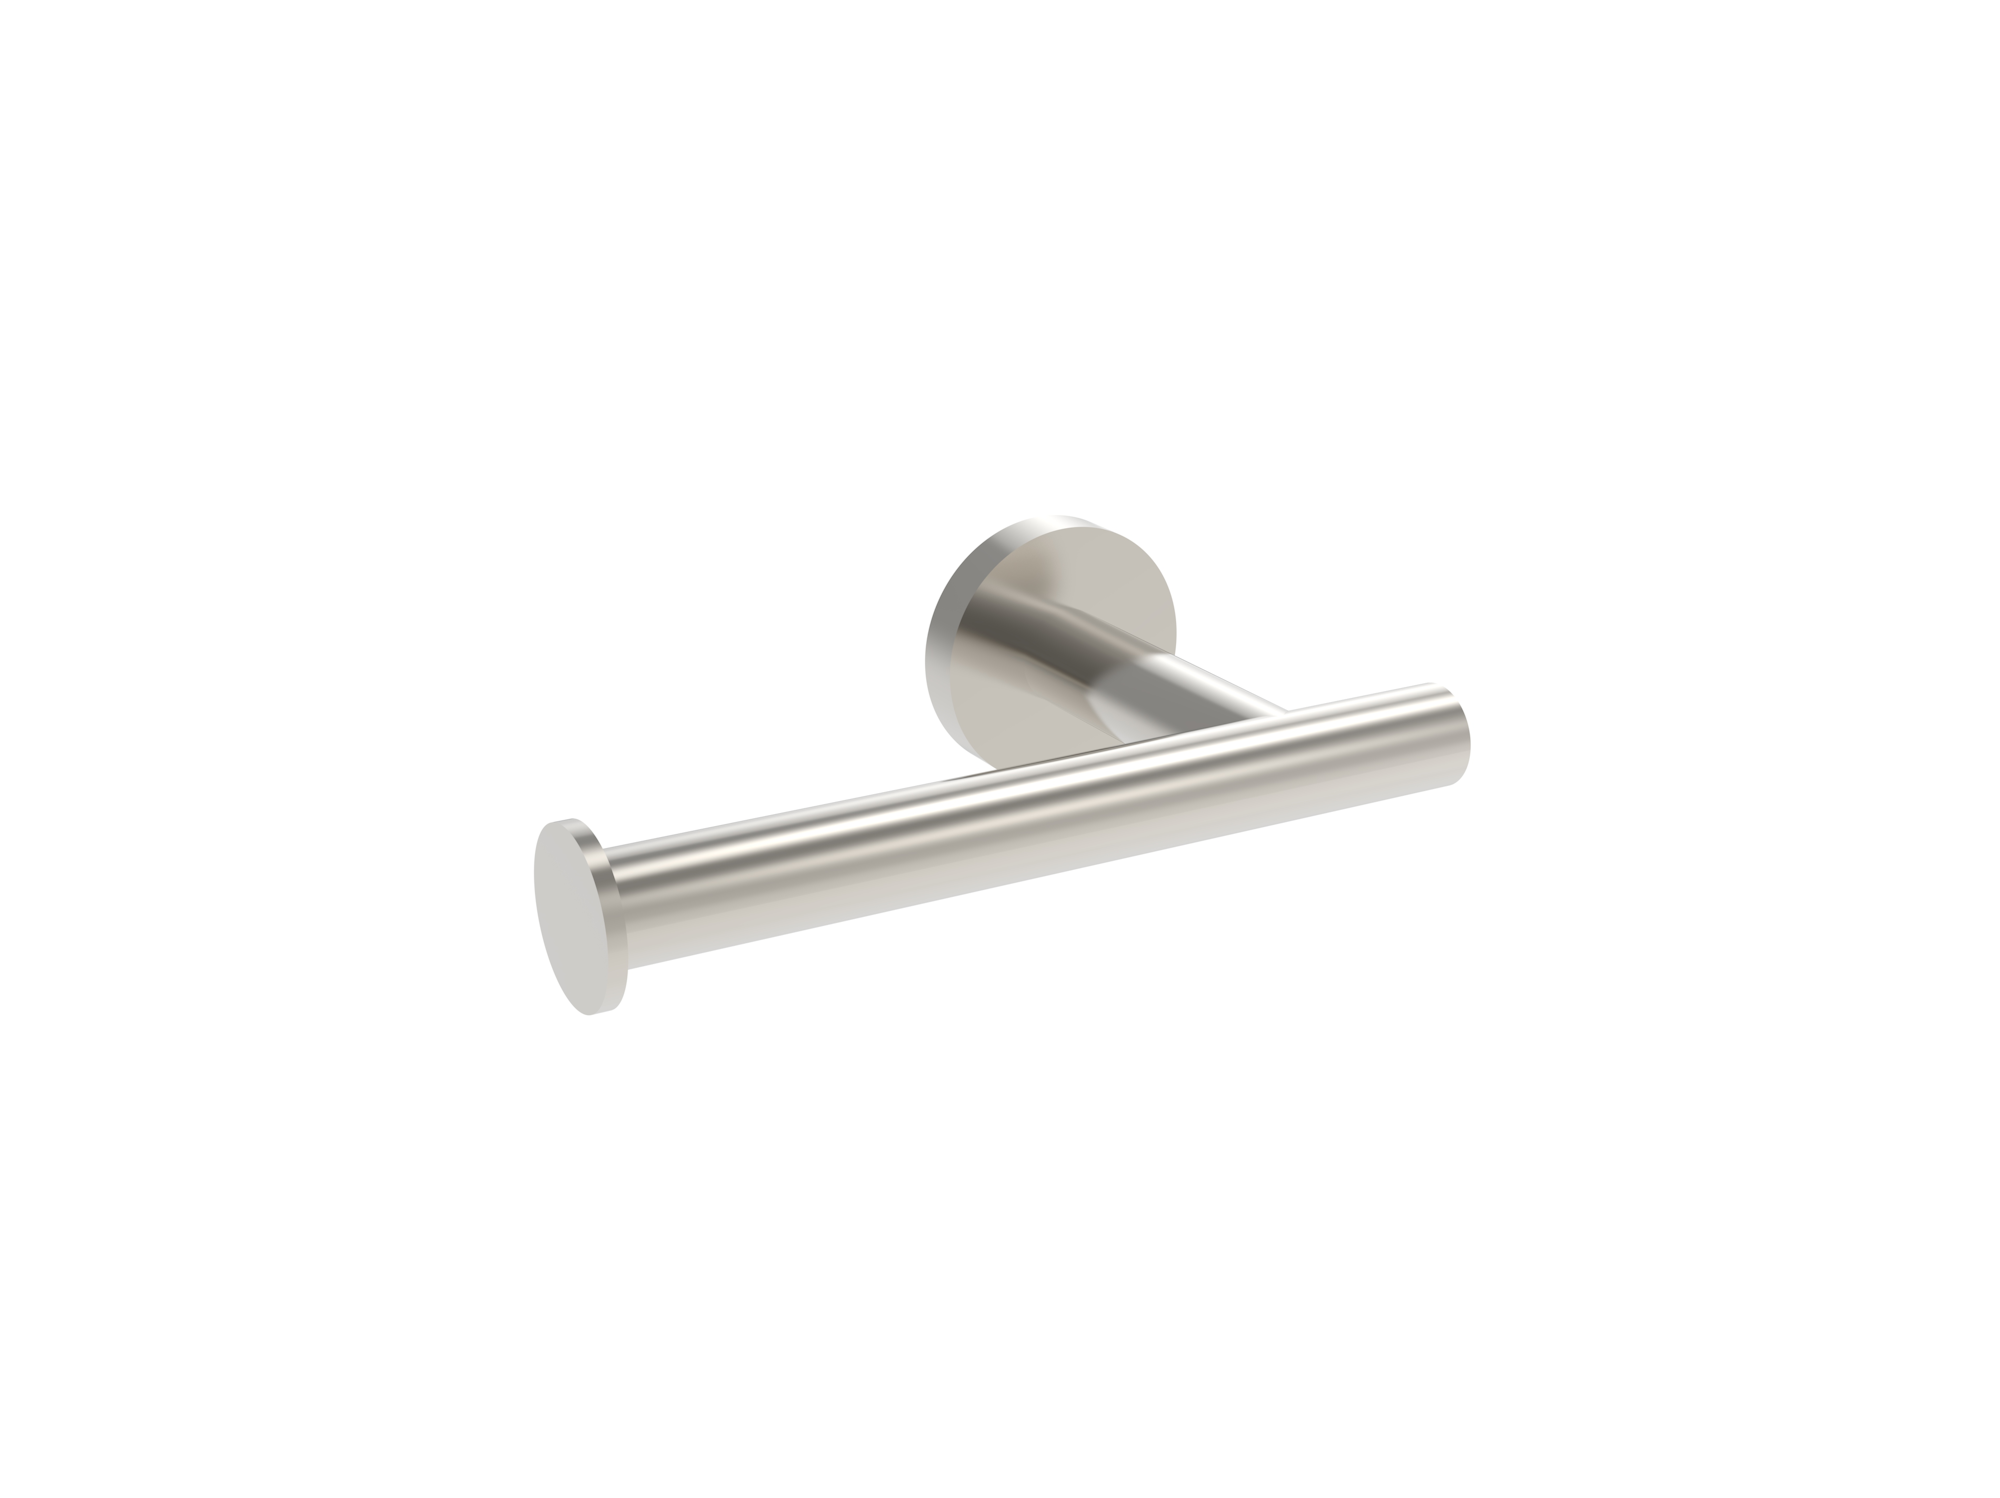 COS toilet roll holder - Brushed Nickel